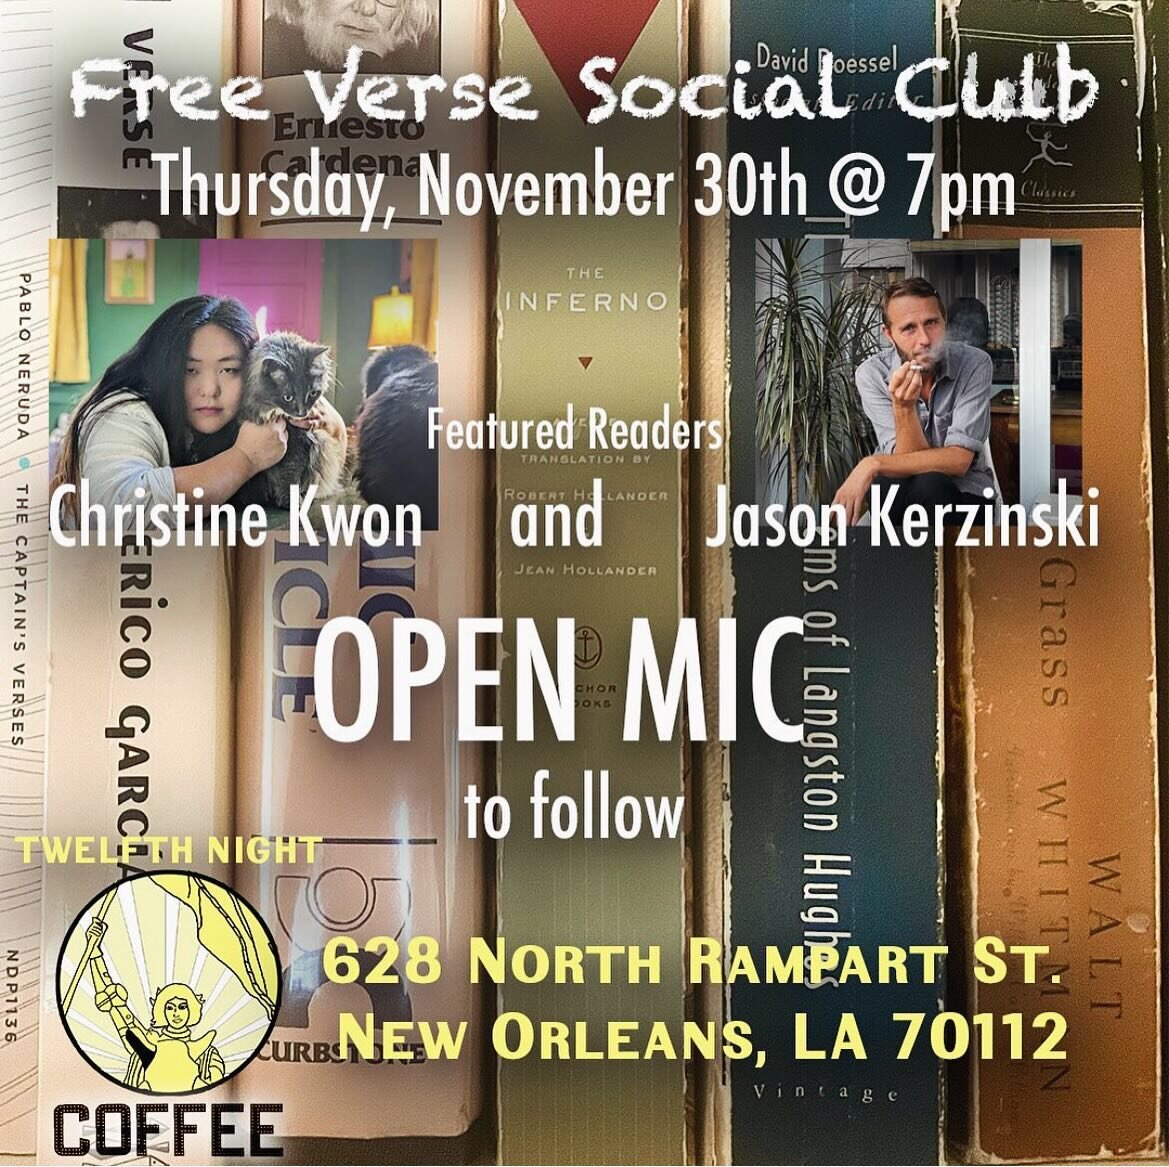 Our first open mic is TONIGHT! Poets, writers, artist, and all who love literature&hellip;we will be having our first monthly poetry reading and open mic tonight, November 30th at 7pm. Our address is 628 Rampart St. (There&rsquo;s also a link to maps